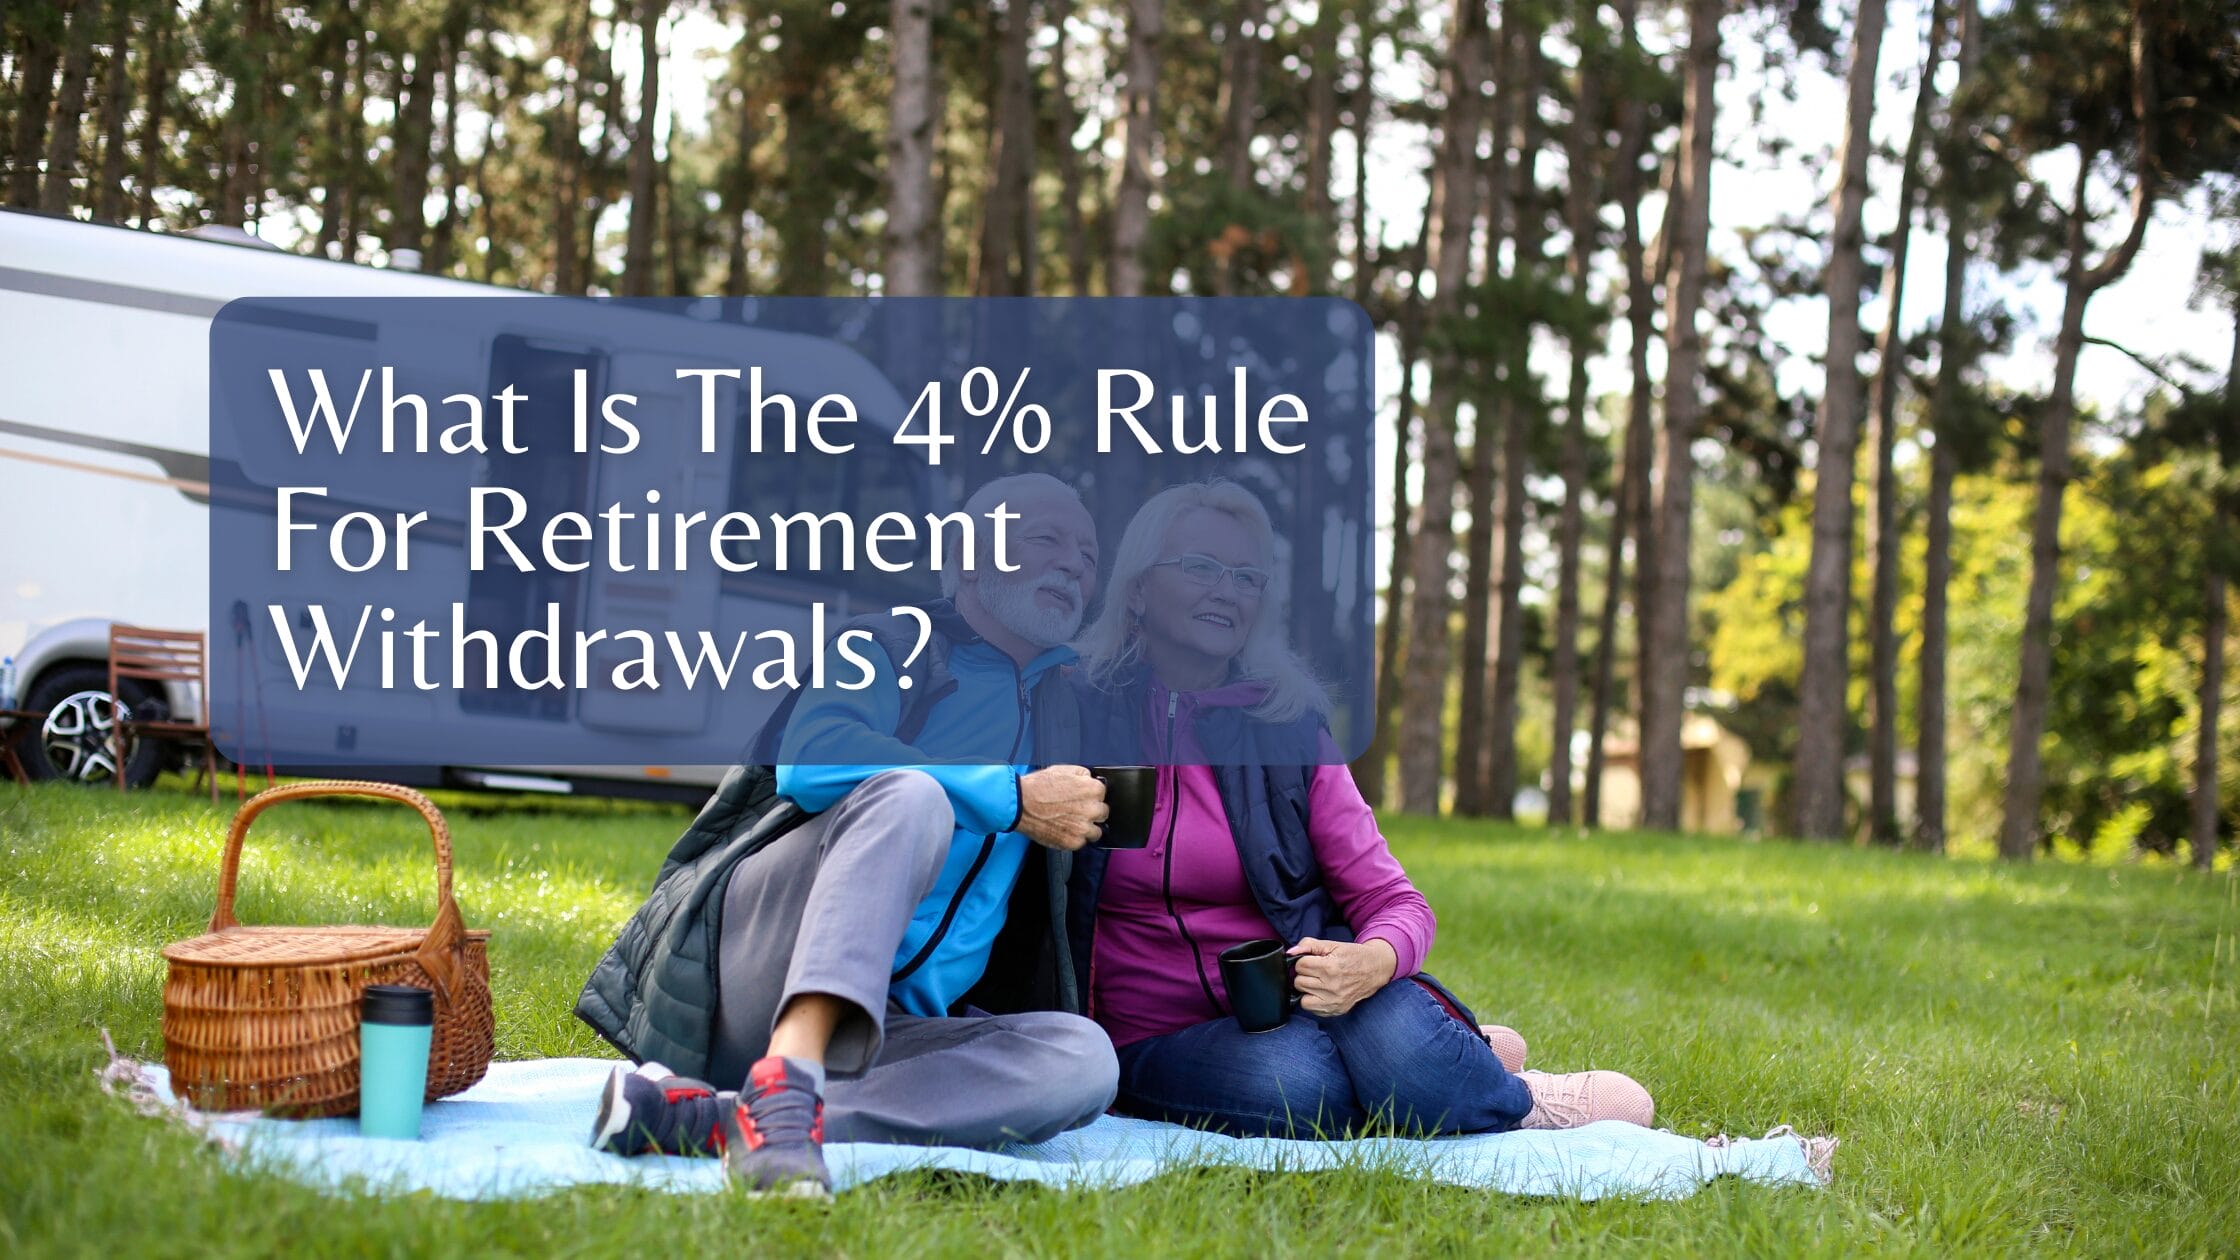 What Is The 4% Rule For Retirement Withdrawals?